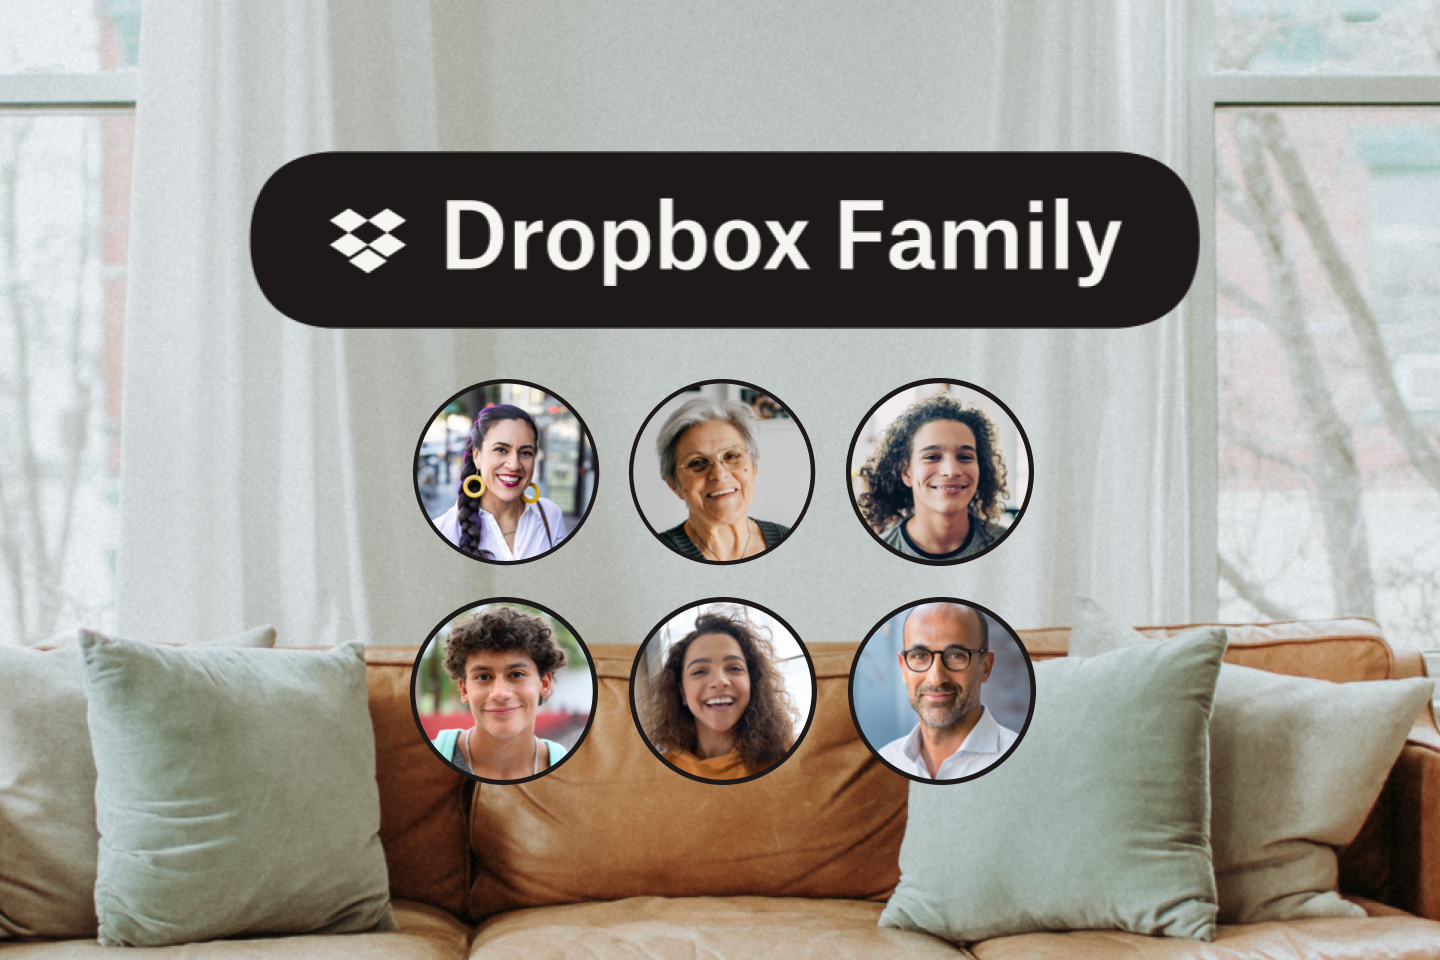 Leather couch and 6 icon pictures of a family with a Dropbox Family logo